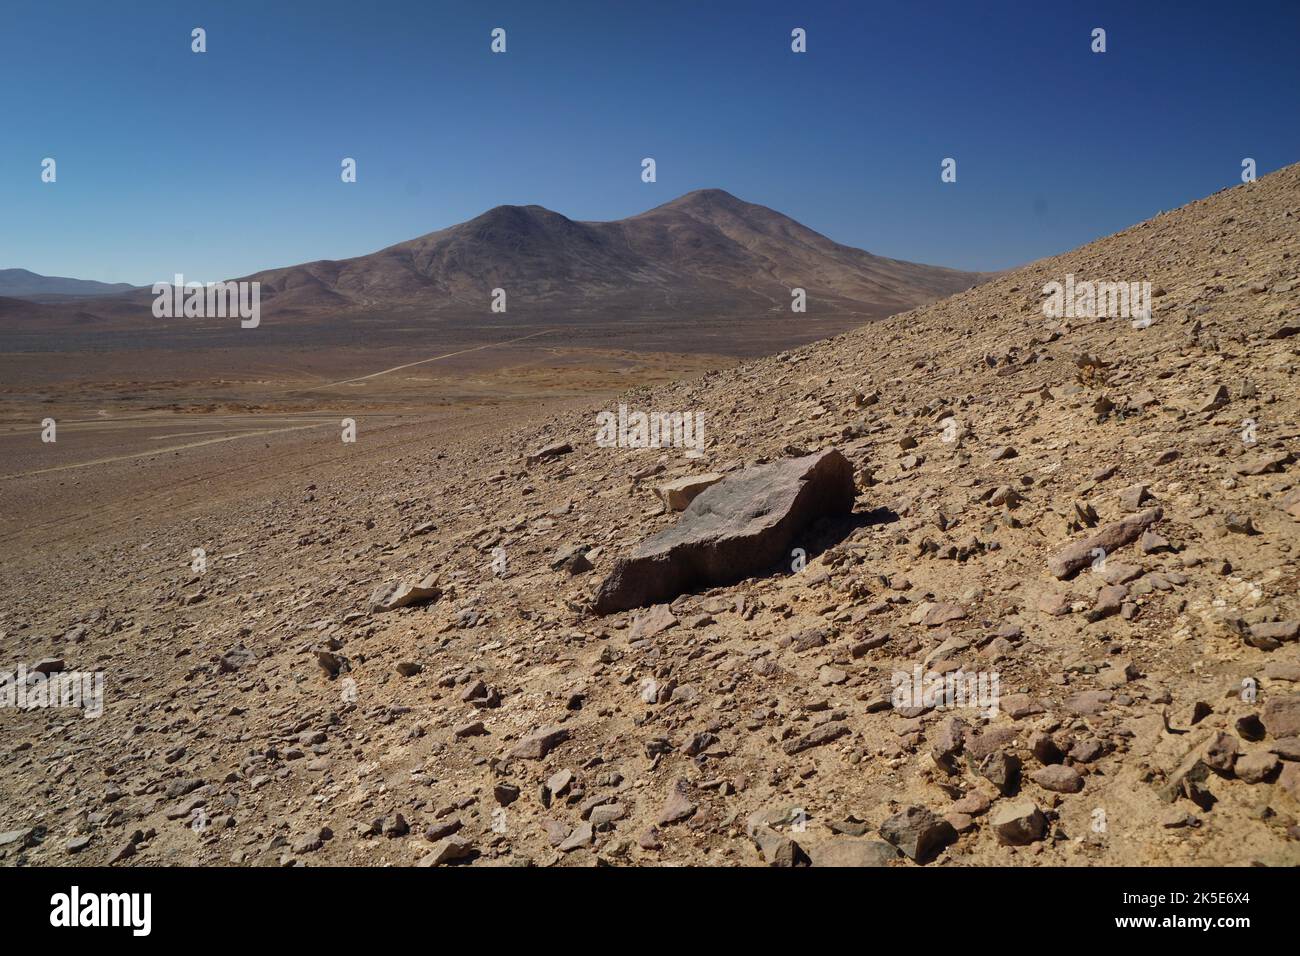 Chile's Atacama Desert is the driest non-polar desert on Earth -- and a ready analog for Mars' rugged, arid terrain. Few places are as hostile to life as Chile's Atacama Desert. It's the driest non-polar desert on Earth, and only the hardiest microbes survive there. Its rocky landscape has lain undisturbed for eons, exposed to extreme temperatures and radiation from the sun. A unique version of an original NASA image. Credit: NASA/ JPL-Caltech Stock Photo